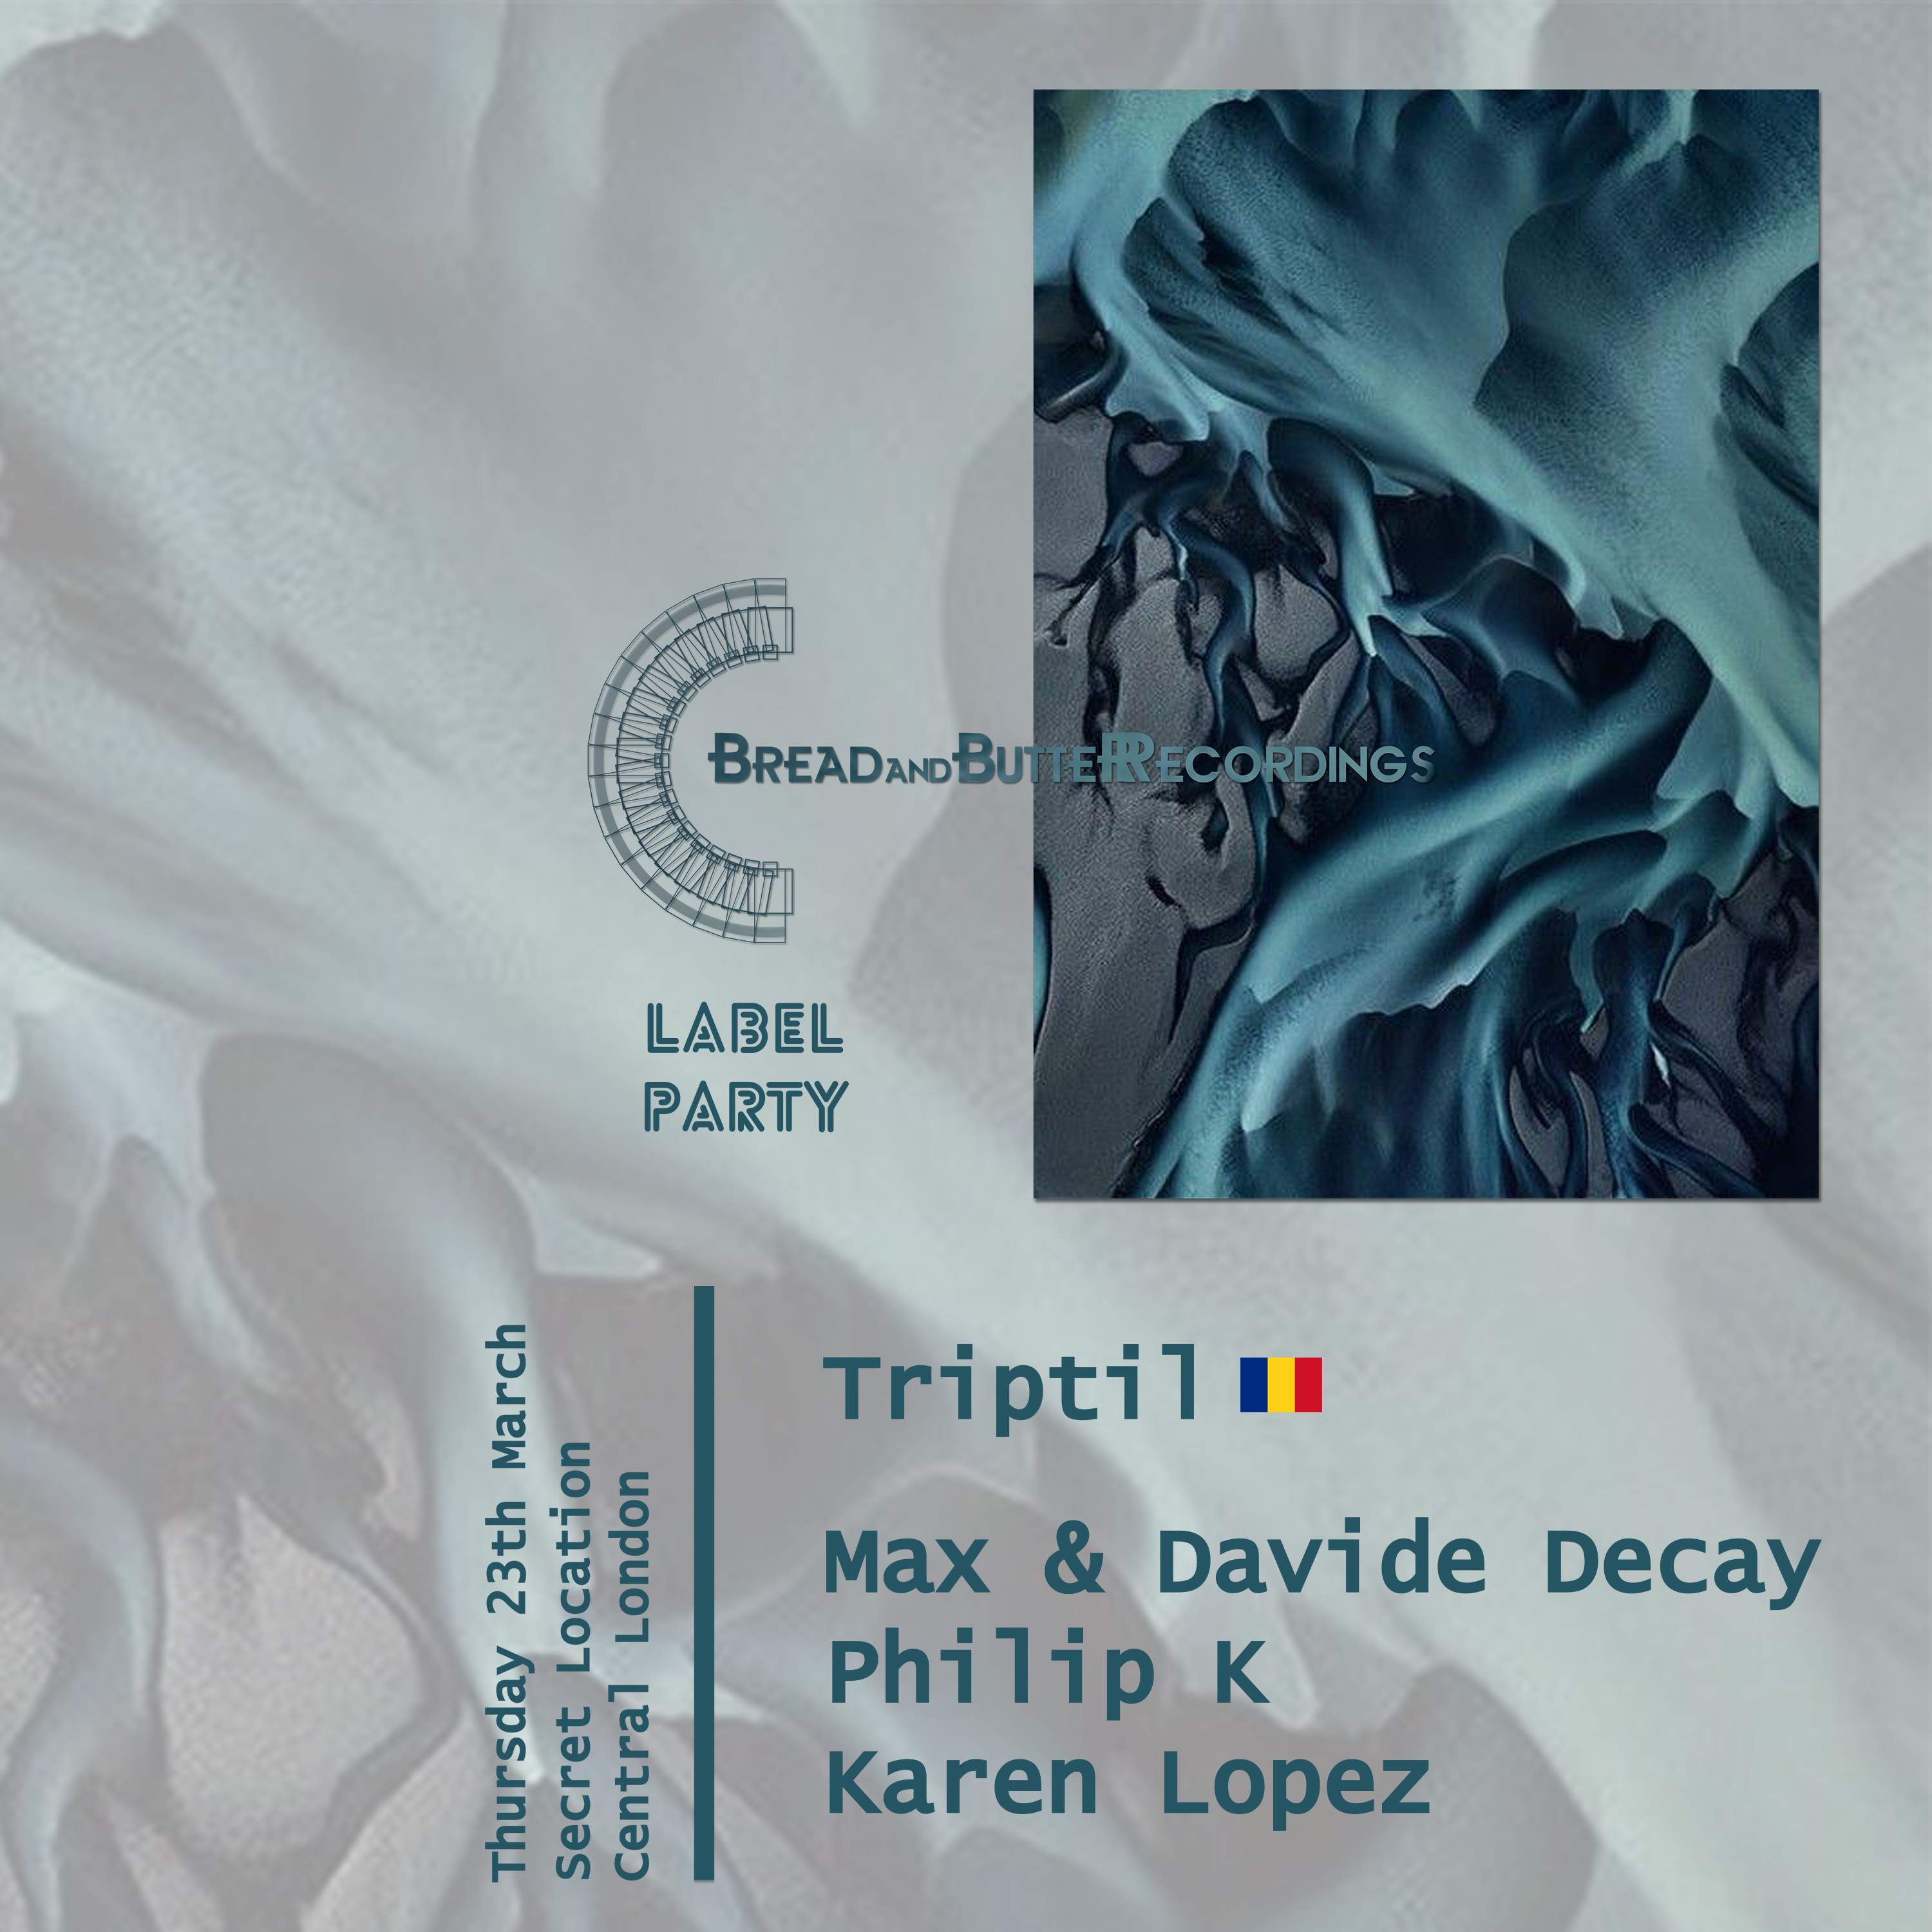 Bread and Butter Recordings Label Party w/ Triptil - Página frontal